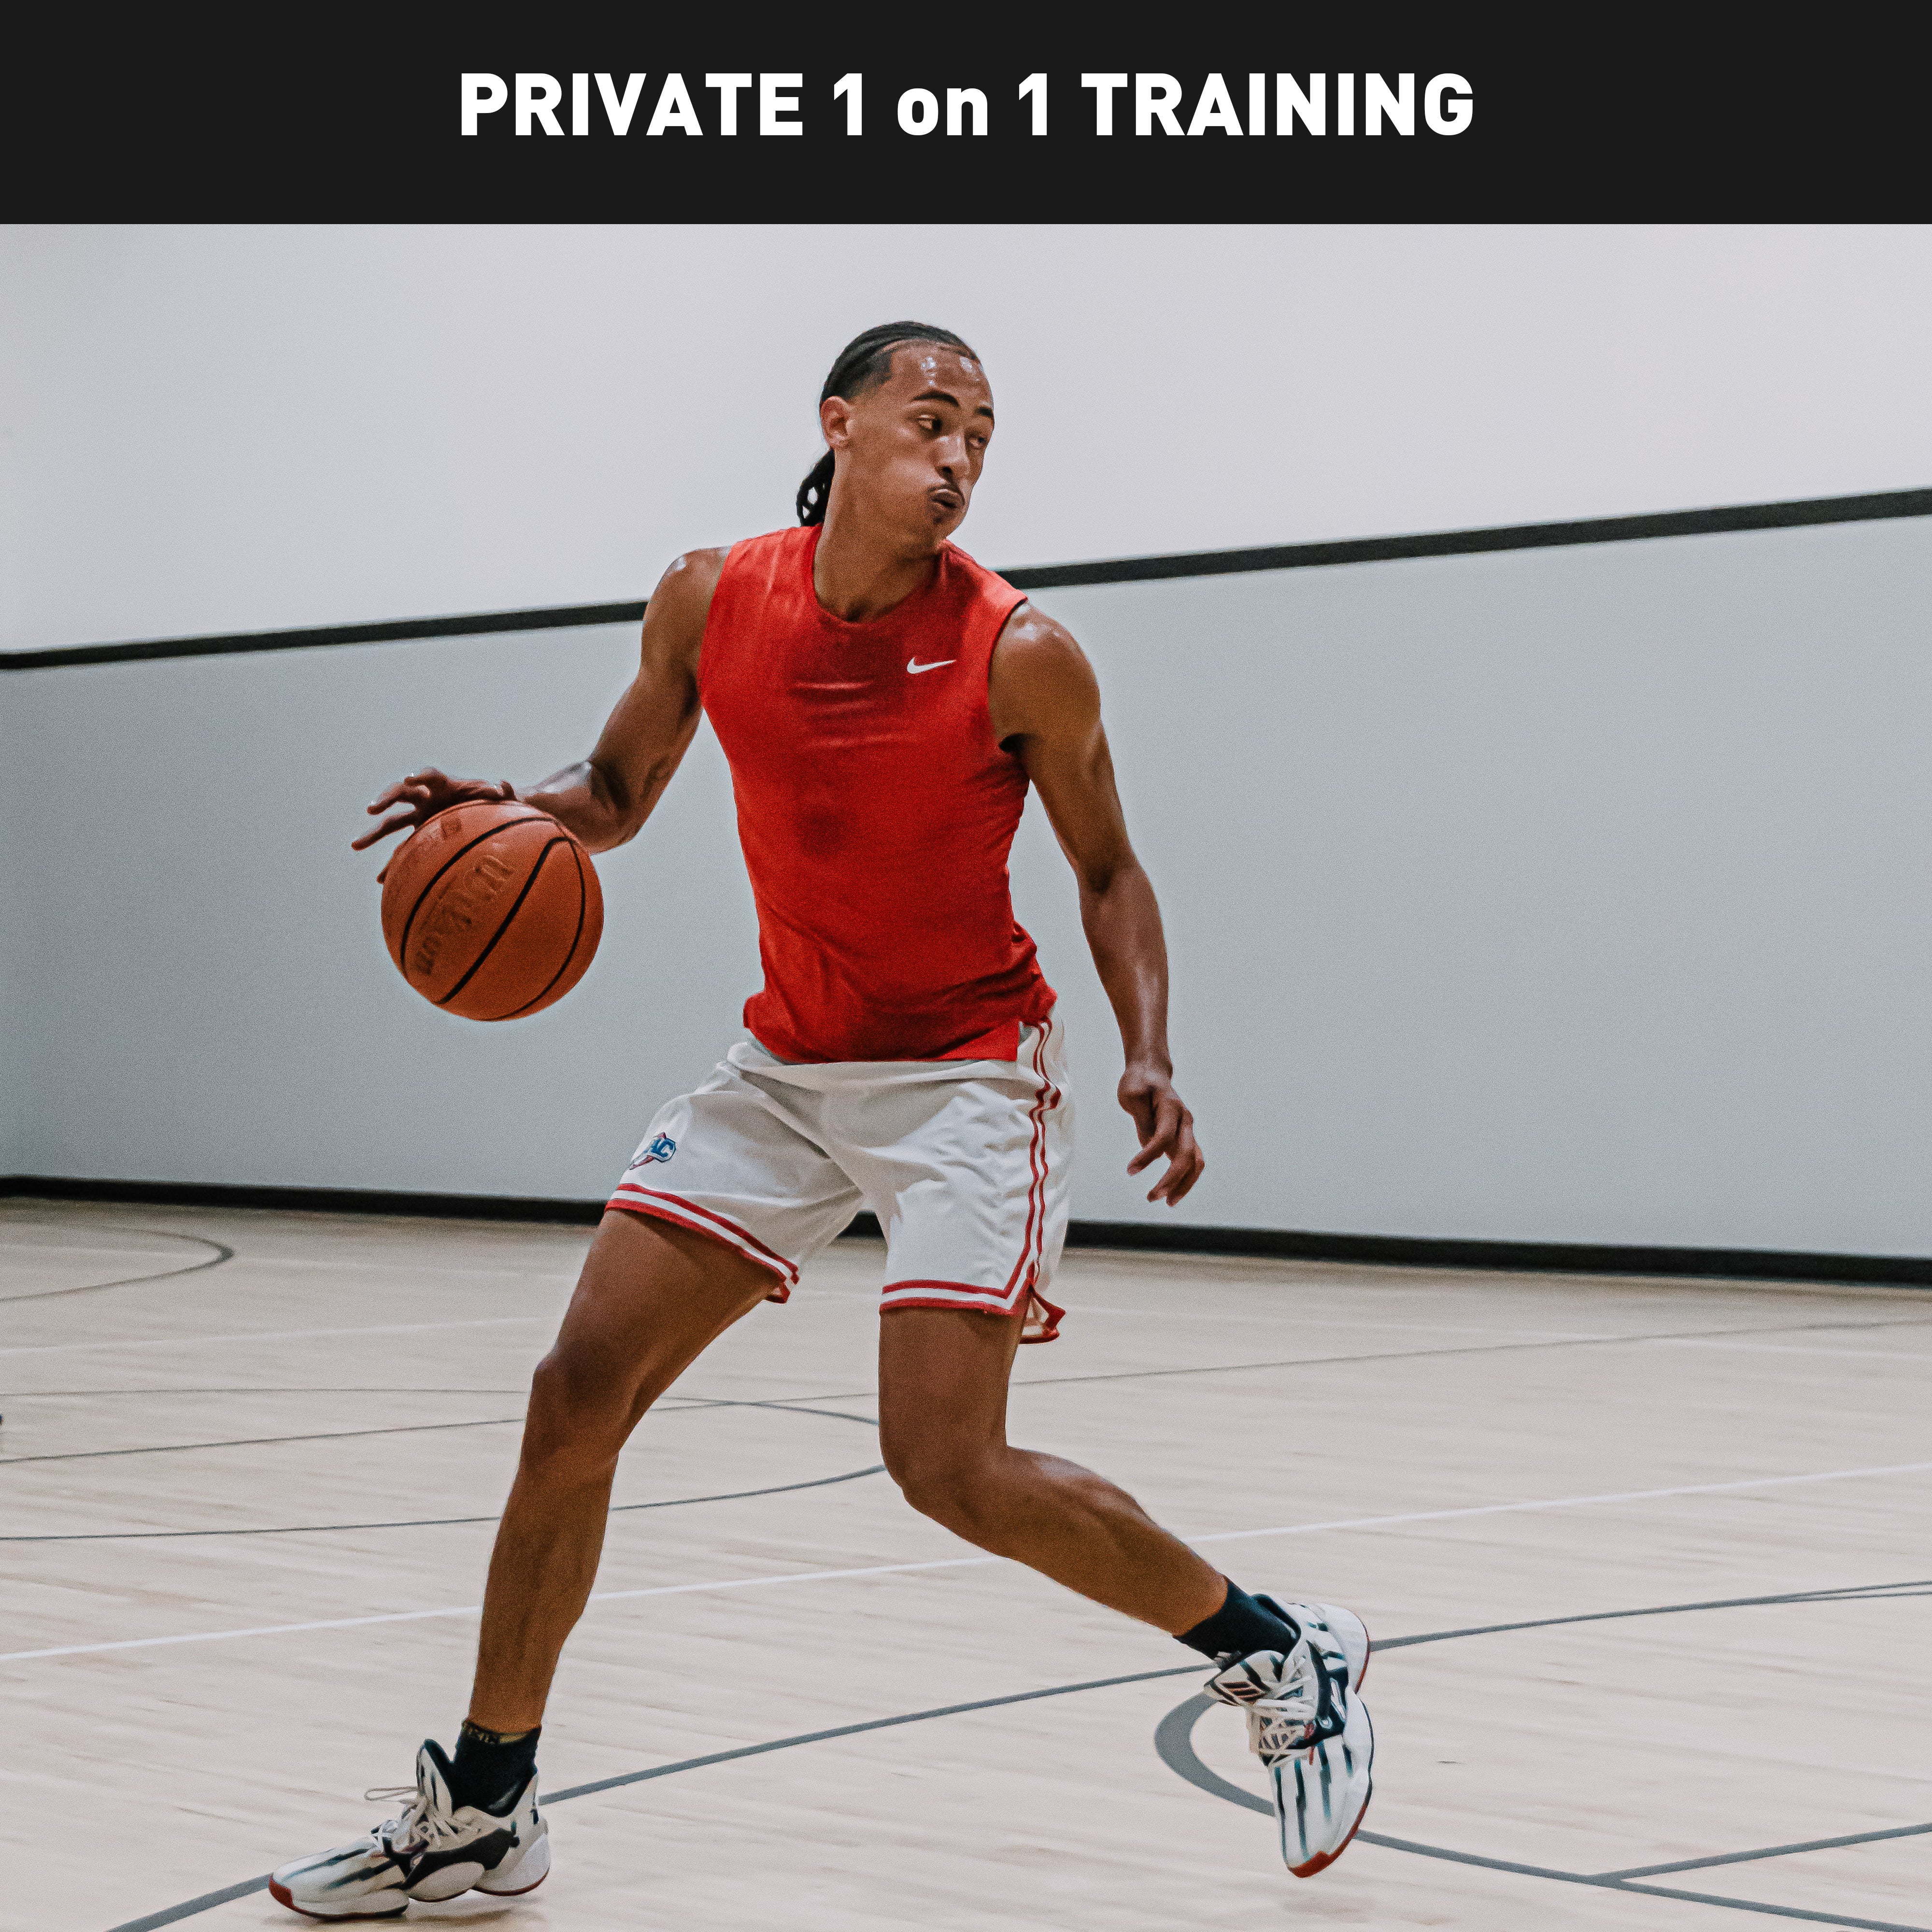 Private 1 on 1 Training